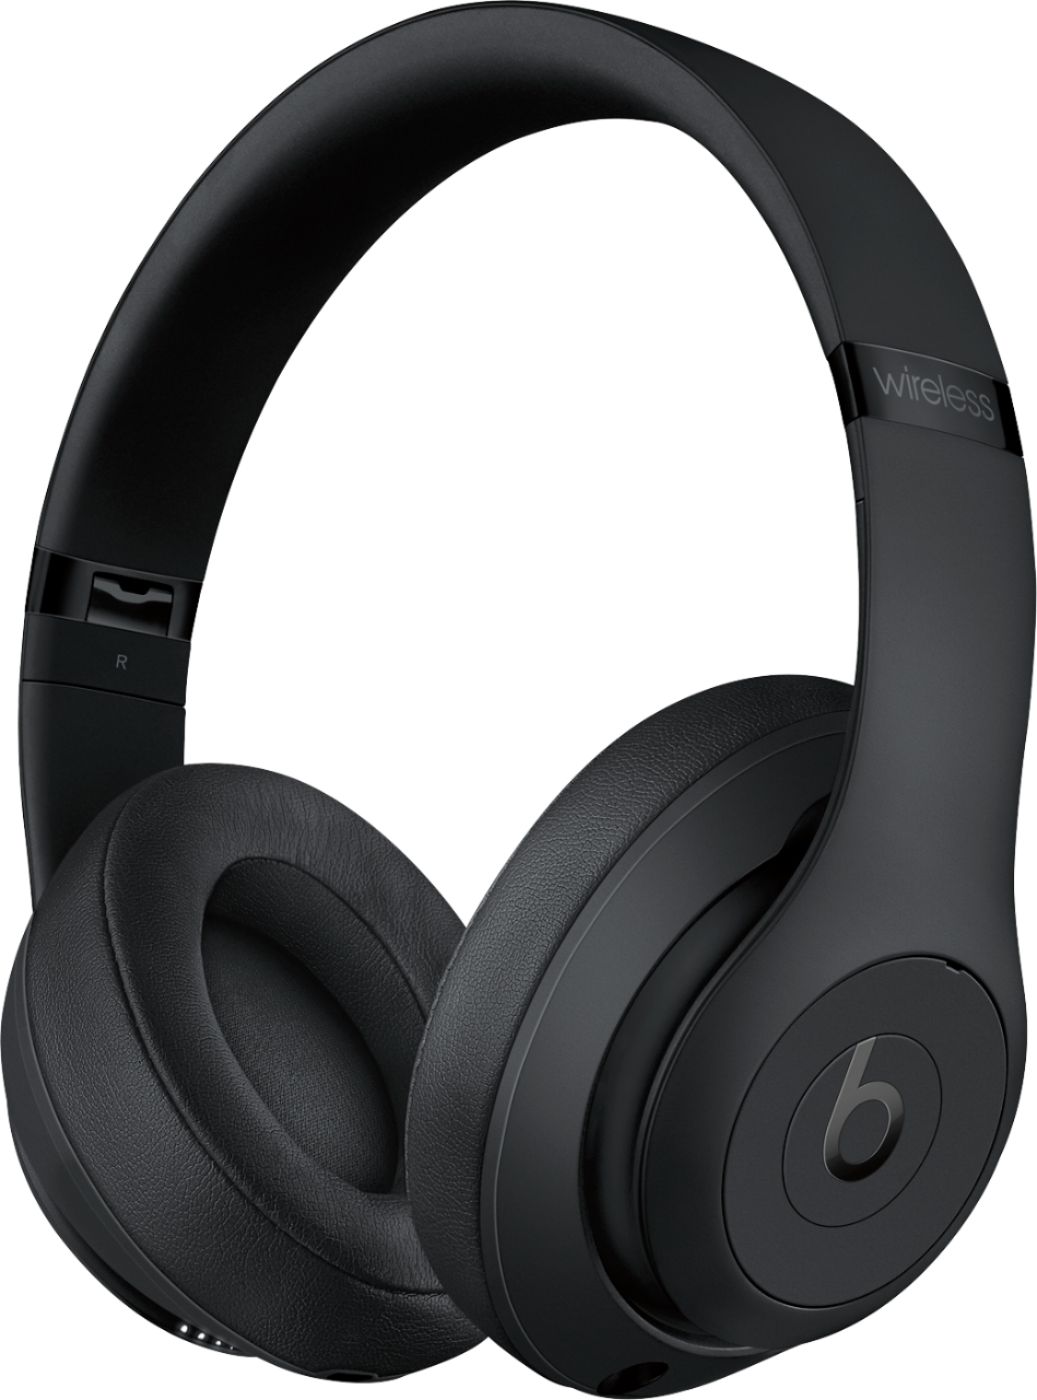 Beats by Dr. Dre – Beats Studio³ Wireless Noise Cancelling Headphones – Just $169.99 at Best Buy